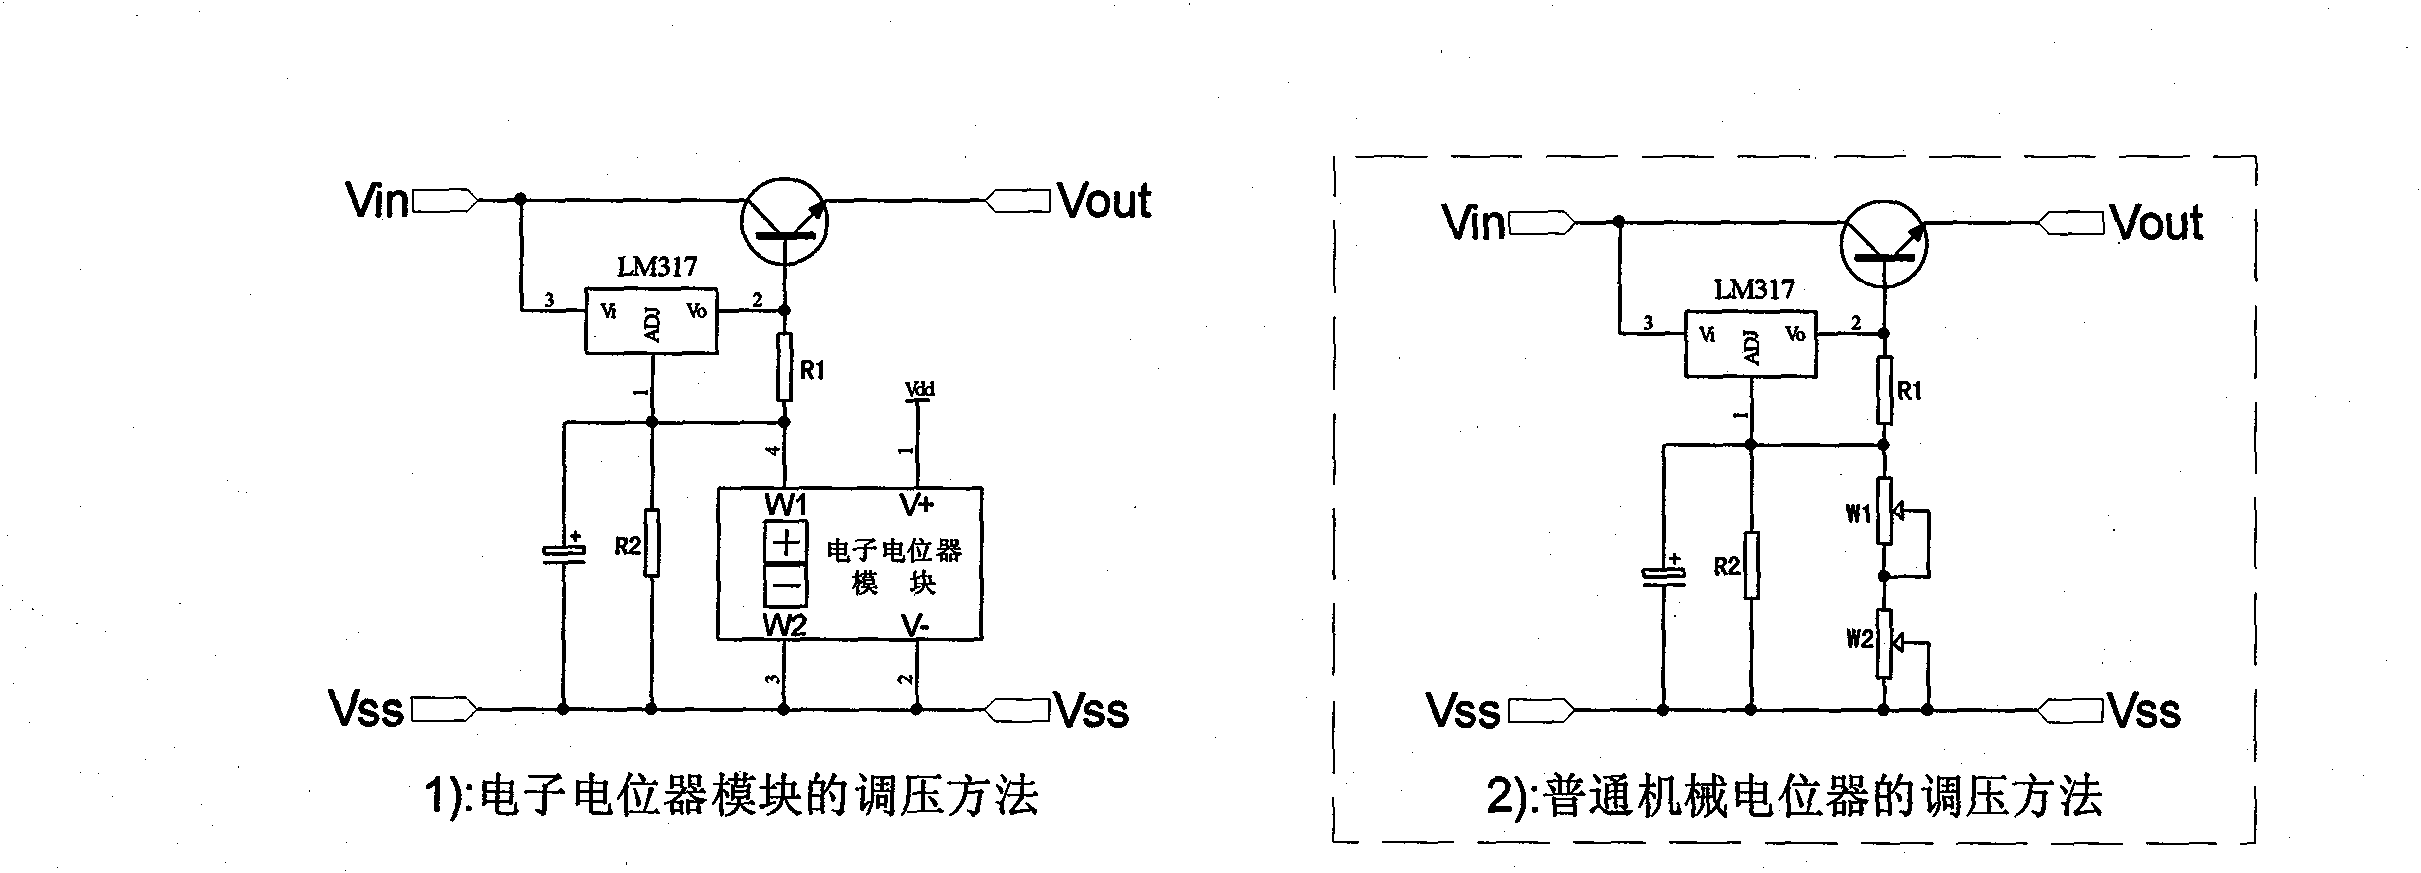 Application of electronic potentiometer module in direct current stabilized voltage power supply